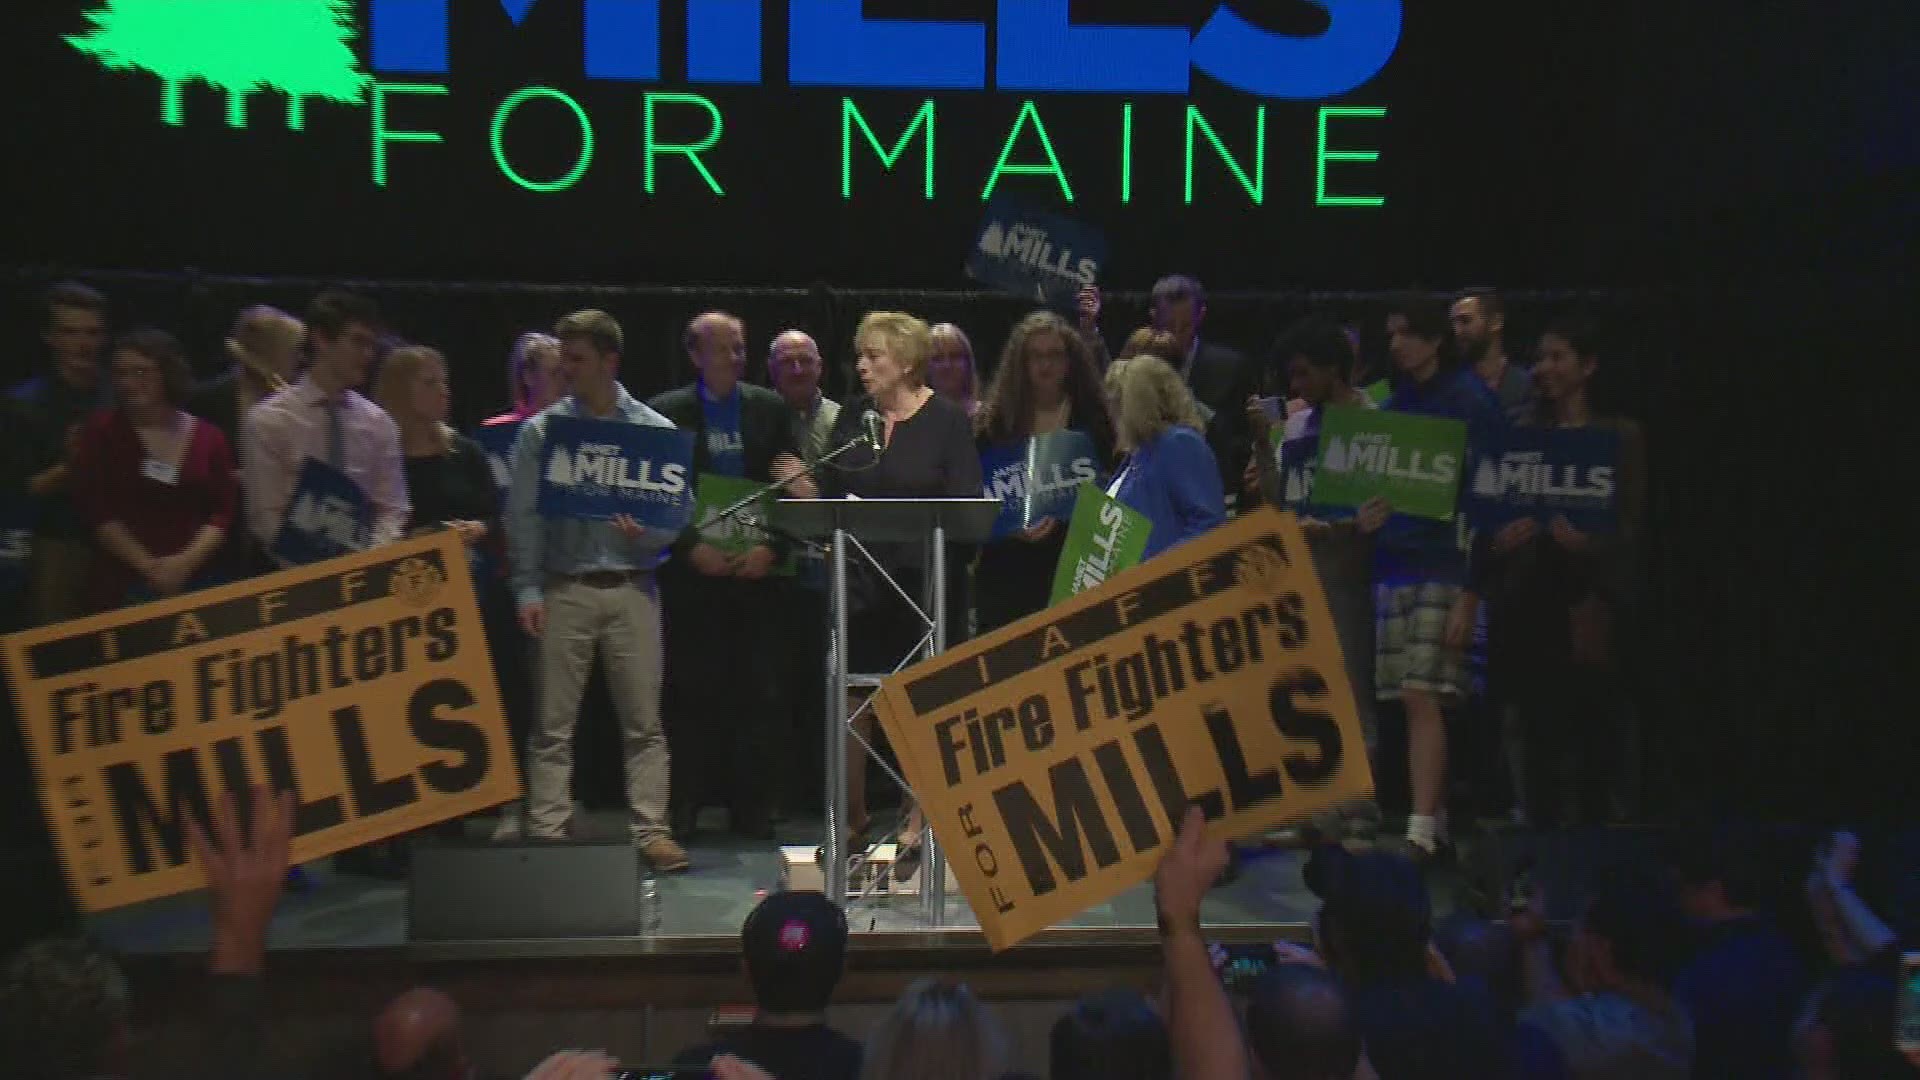 Democrat Janet Mills becomes Maine's first female Governor